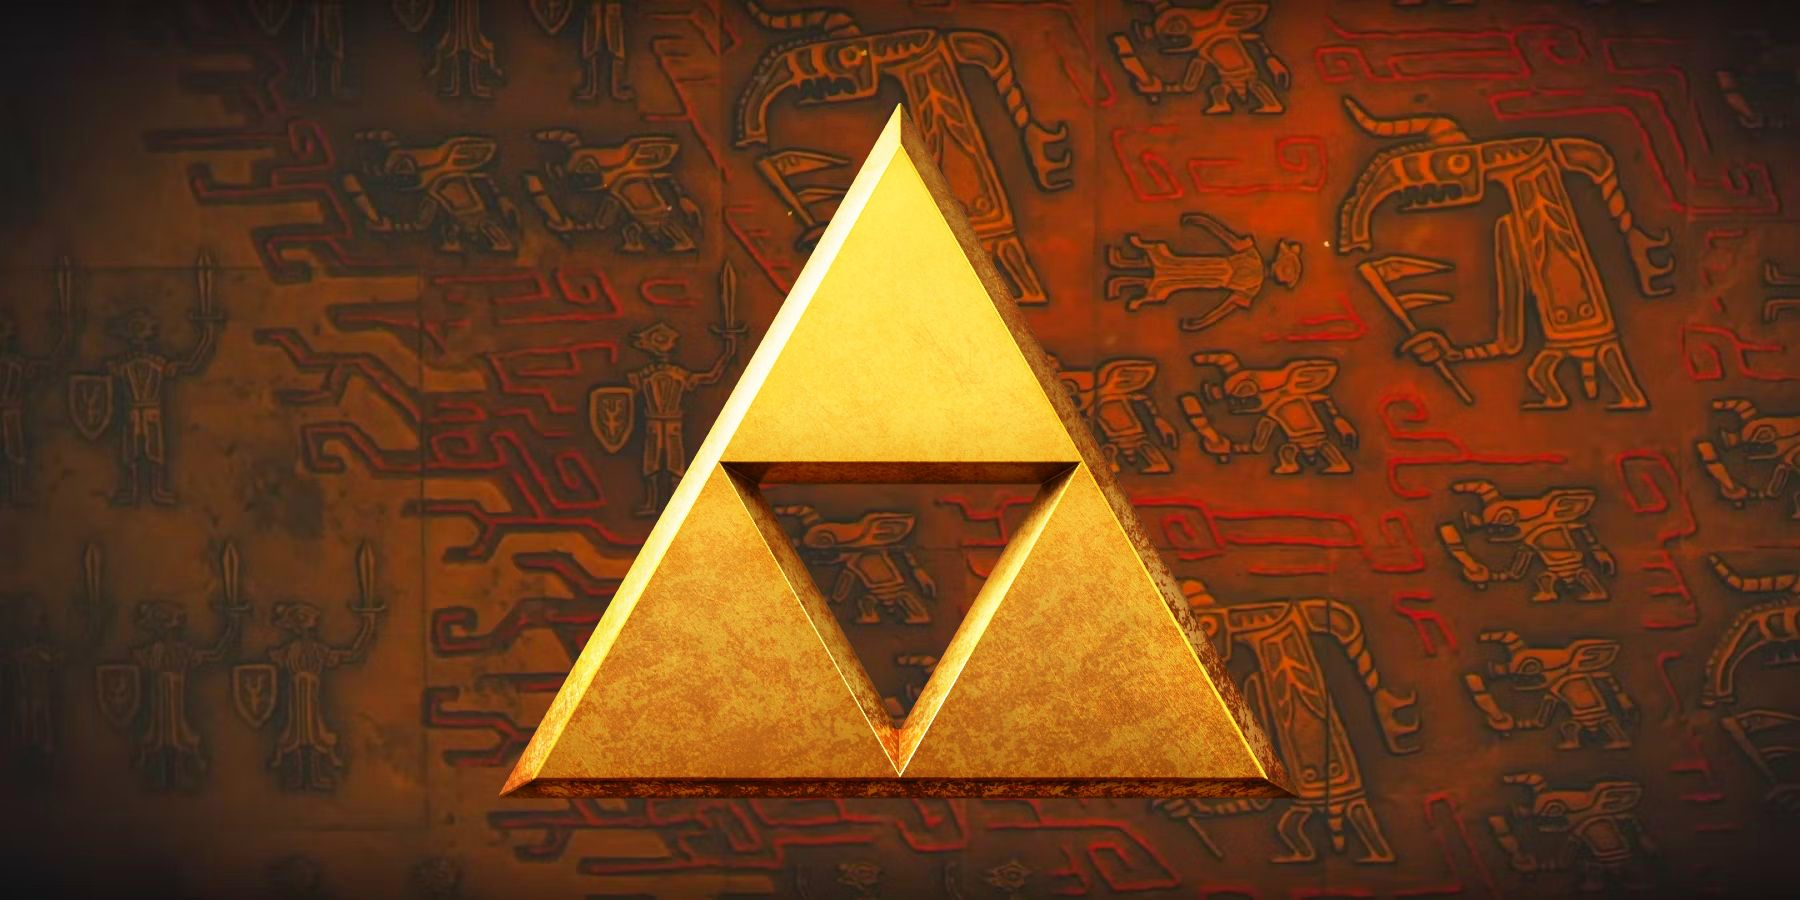 The Triforce from The Legend of Zelda in front of a stone relief showing a conflict from a Tears of the Kingdom trailer.